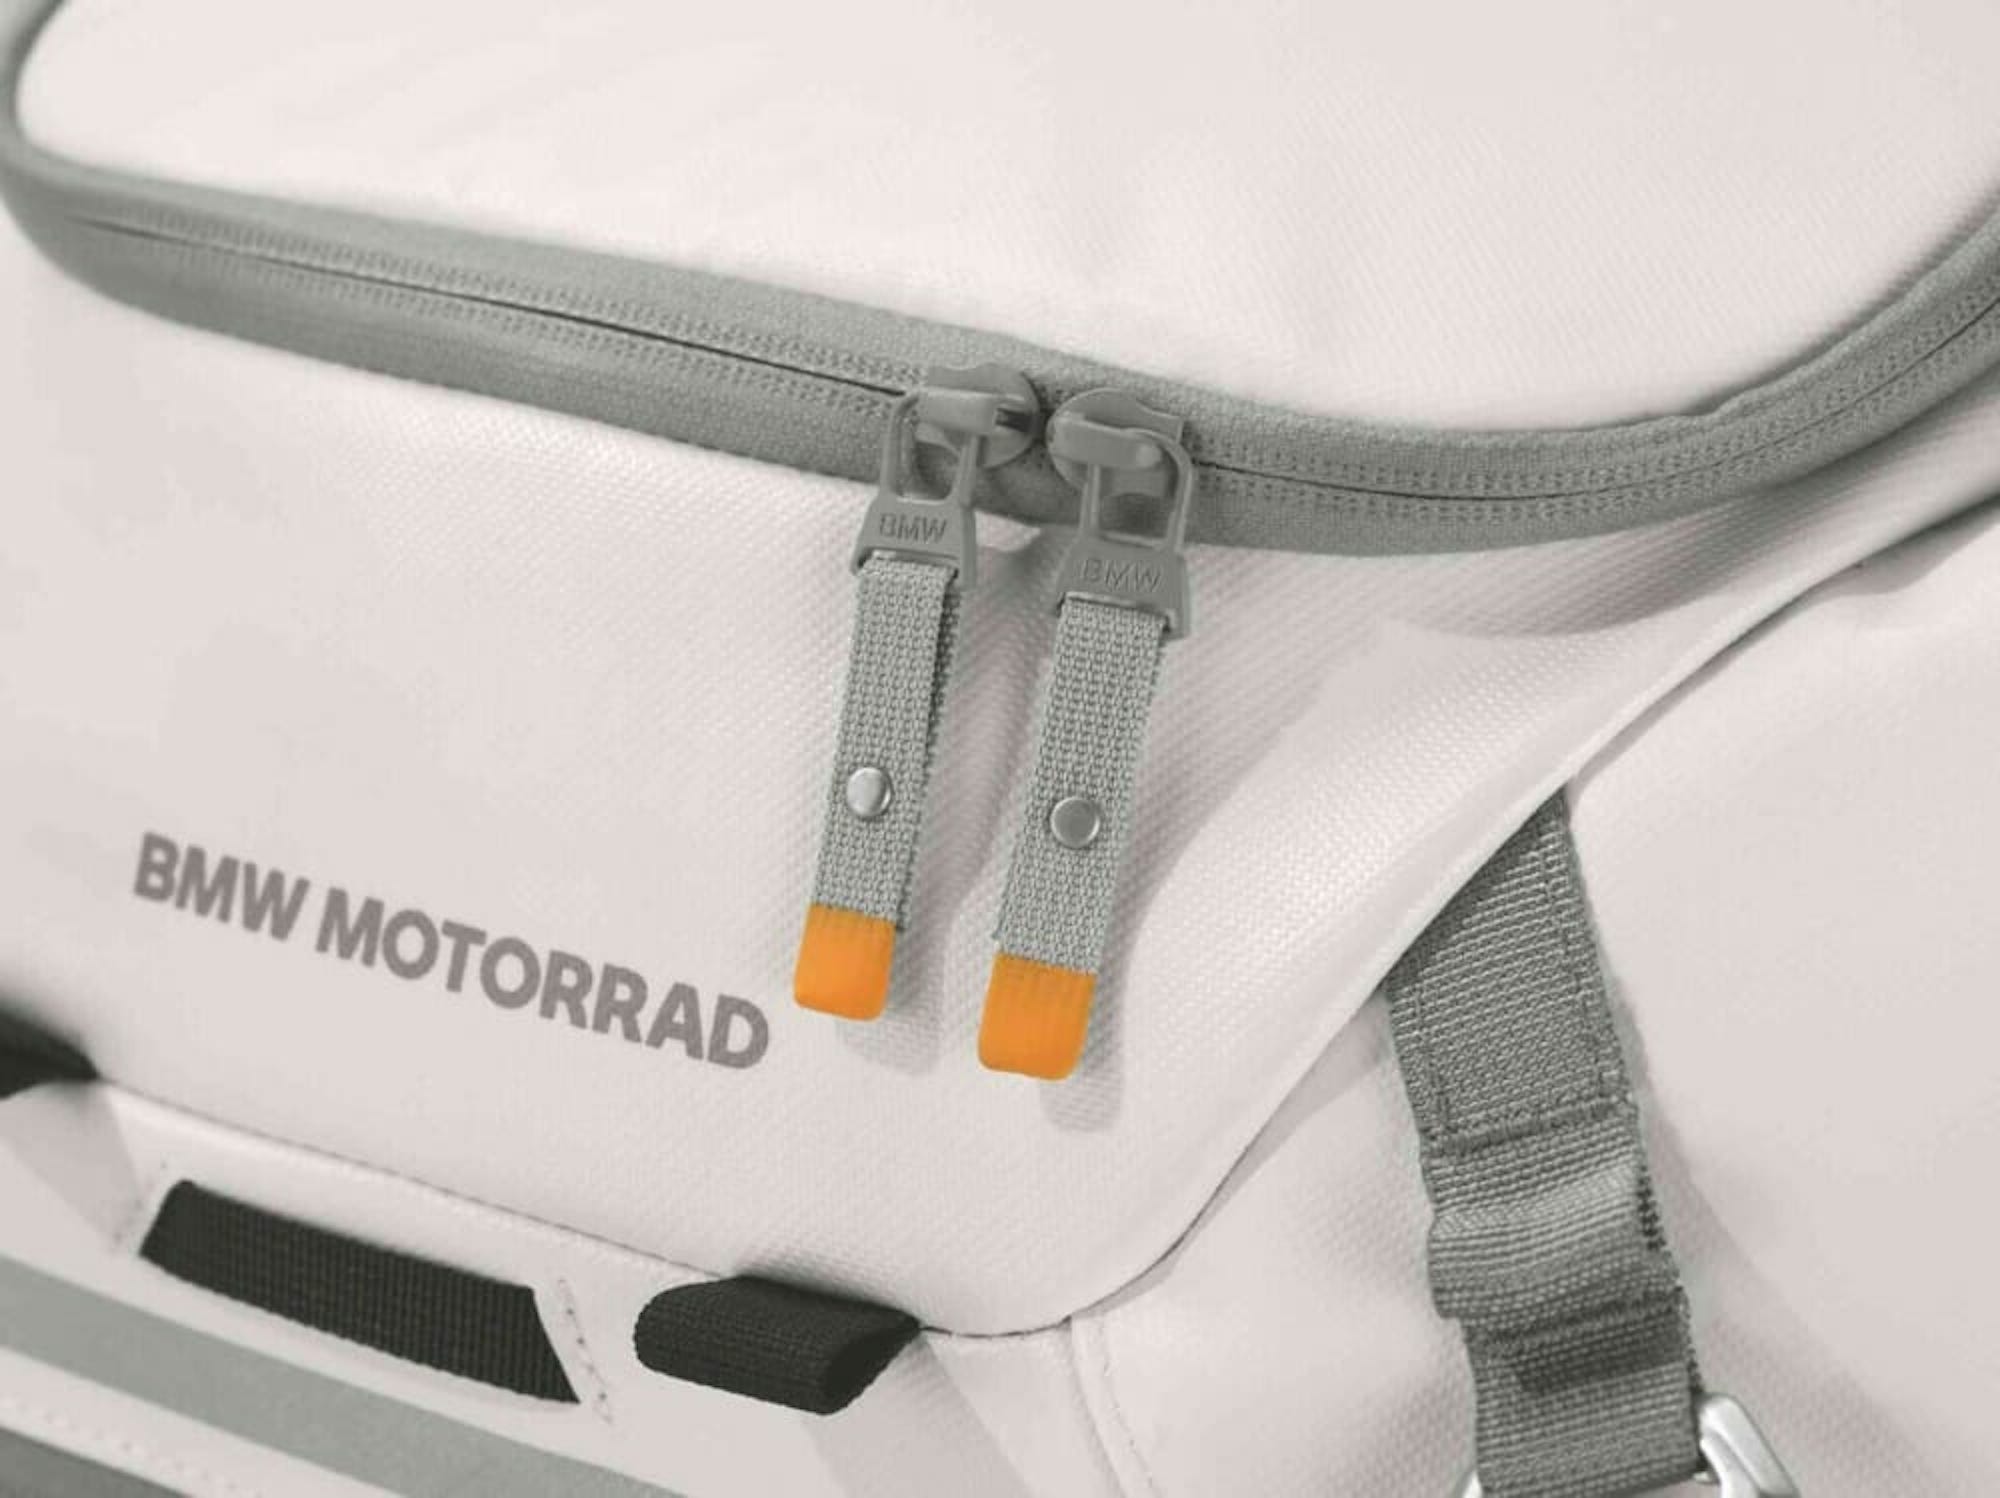 BMW's Urban Collection, featuring tank bags, backpacks and side/rear bags to spare.